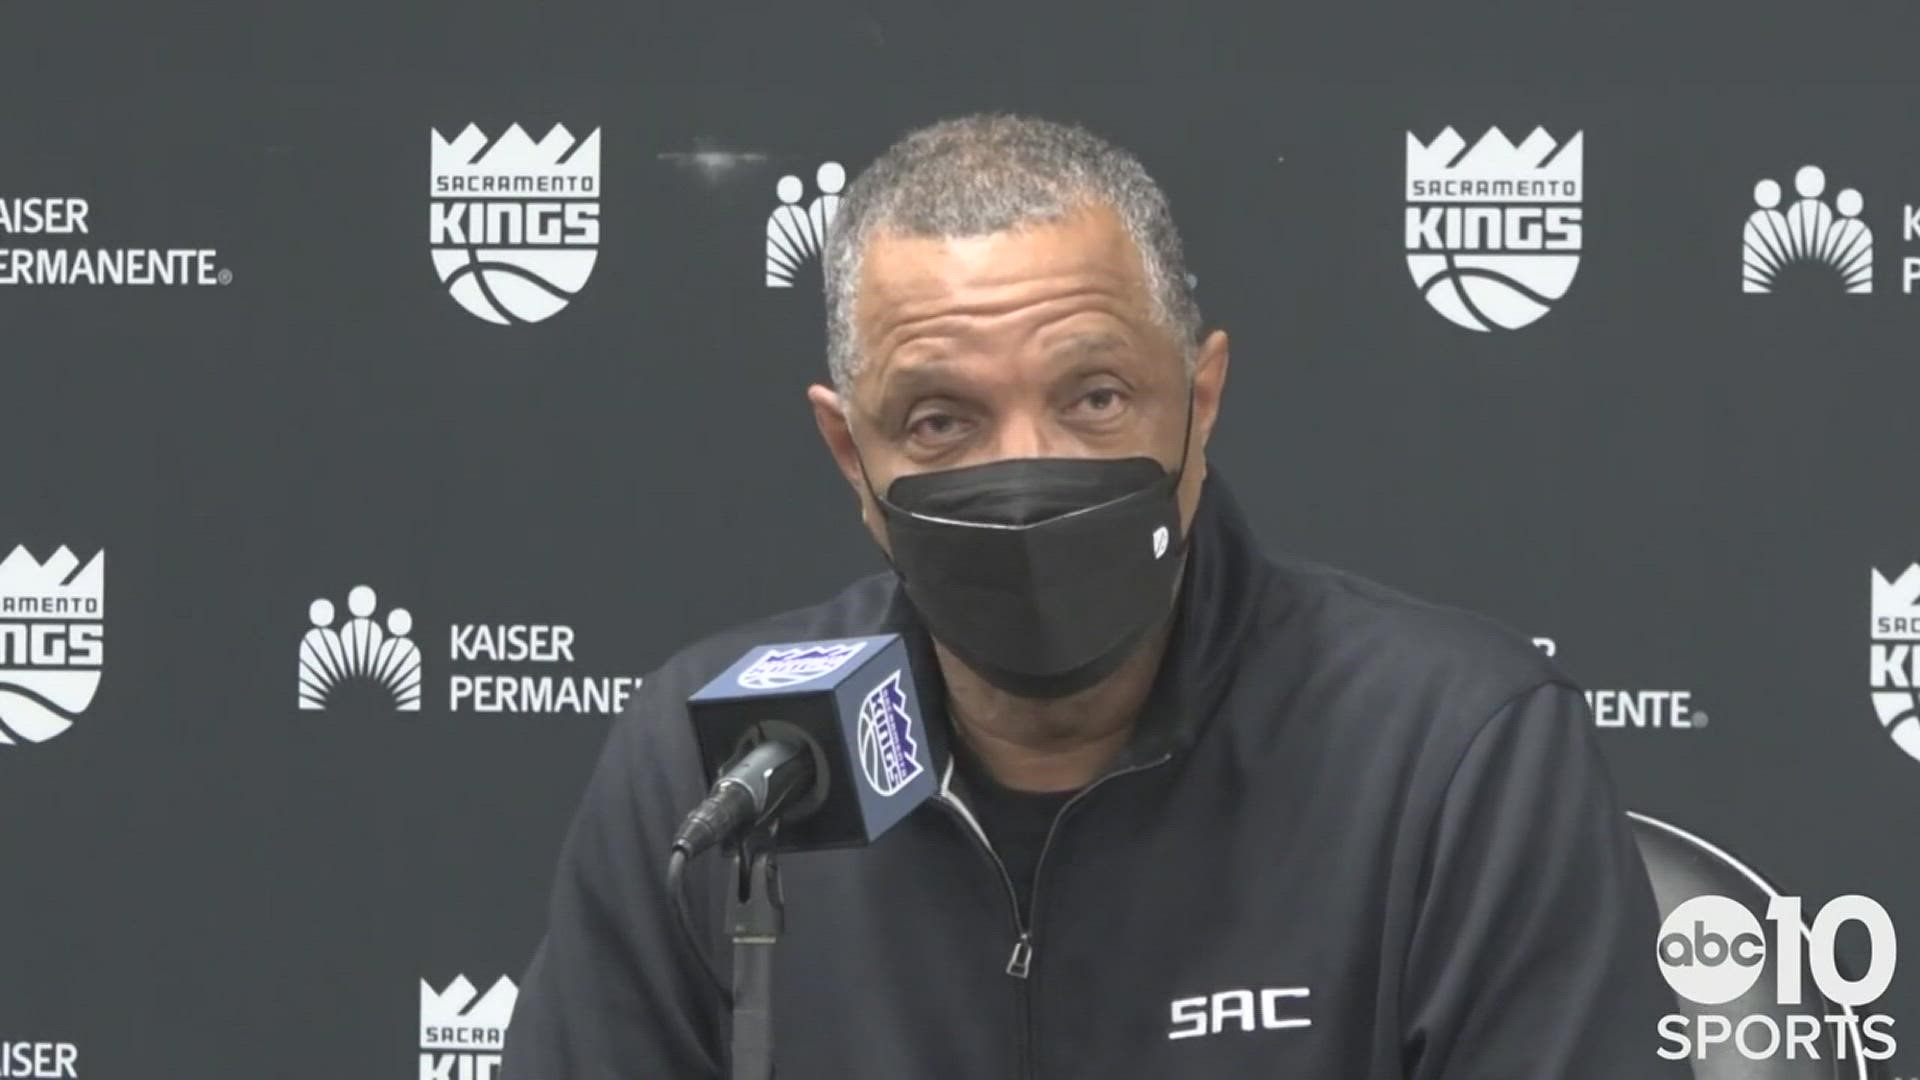 Kings interim head coach Alvin Gentry talks about Wednesday's 125-116 victory over the Los Angeles Lakers and snapping a five game losing streak.